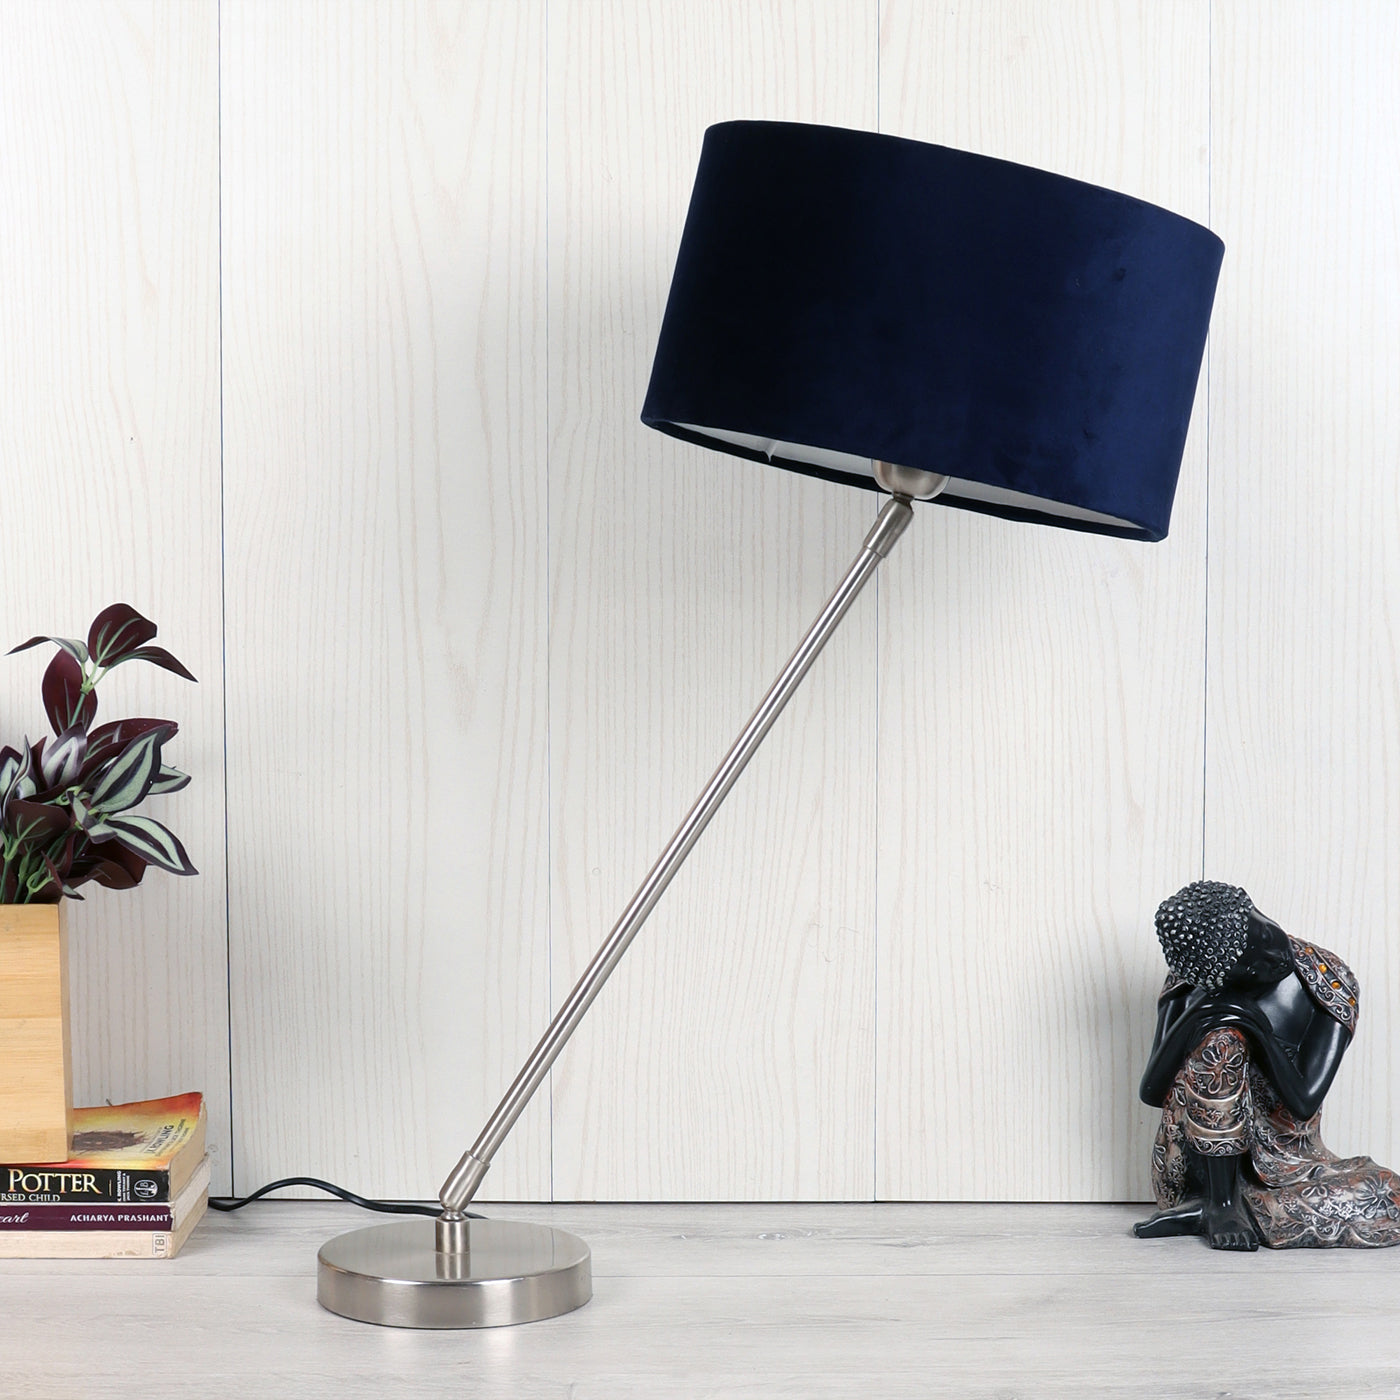 The "Large Silver MJ  Lamp" with Grey velvet shade by Deor de Maison